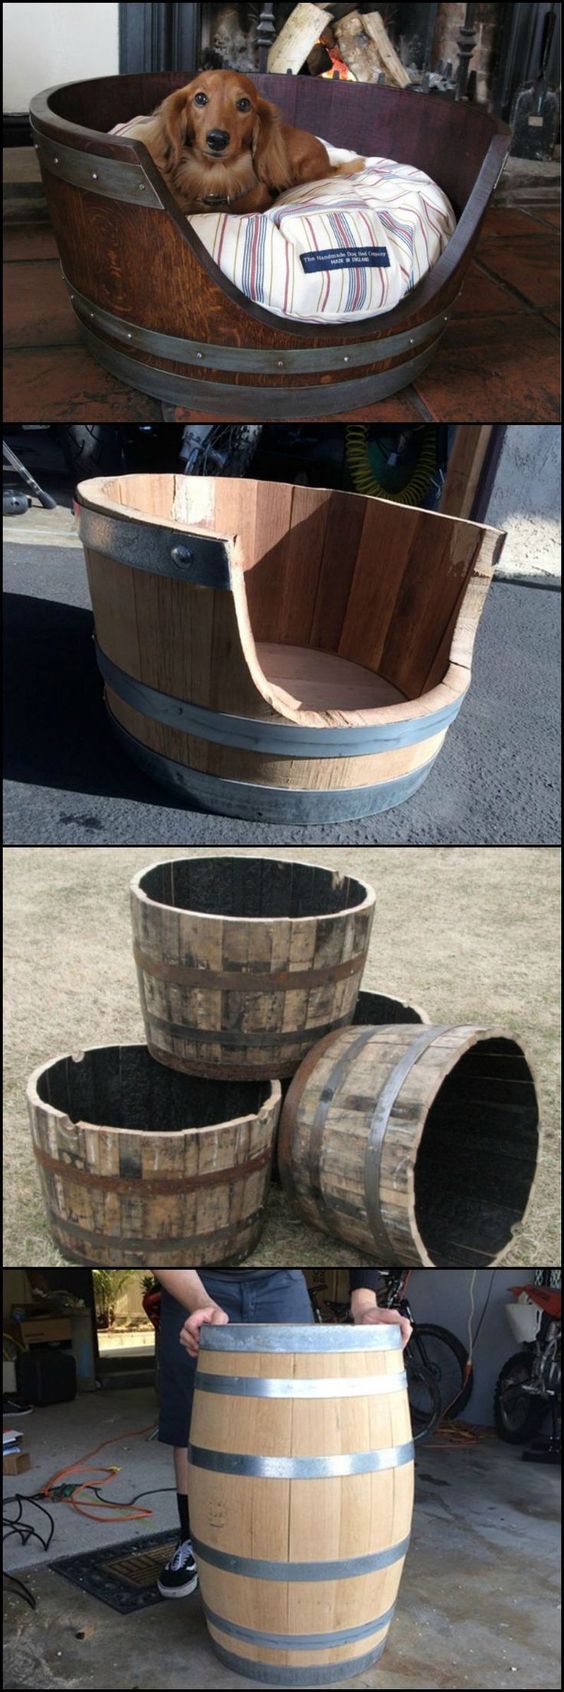 15 Amazing DIY Dog Bed Ideas including this Wine barrel dog bed